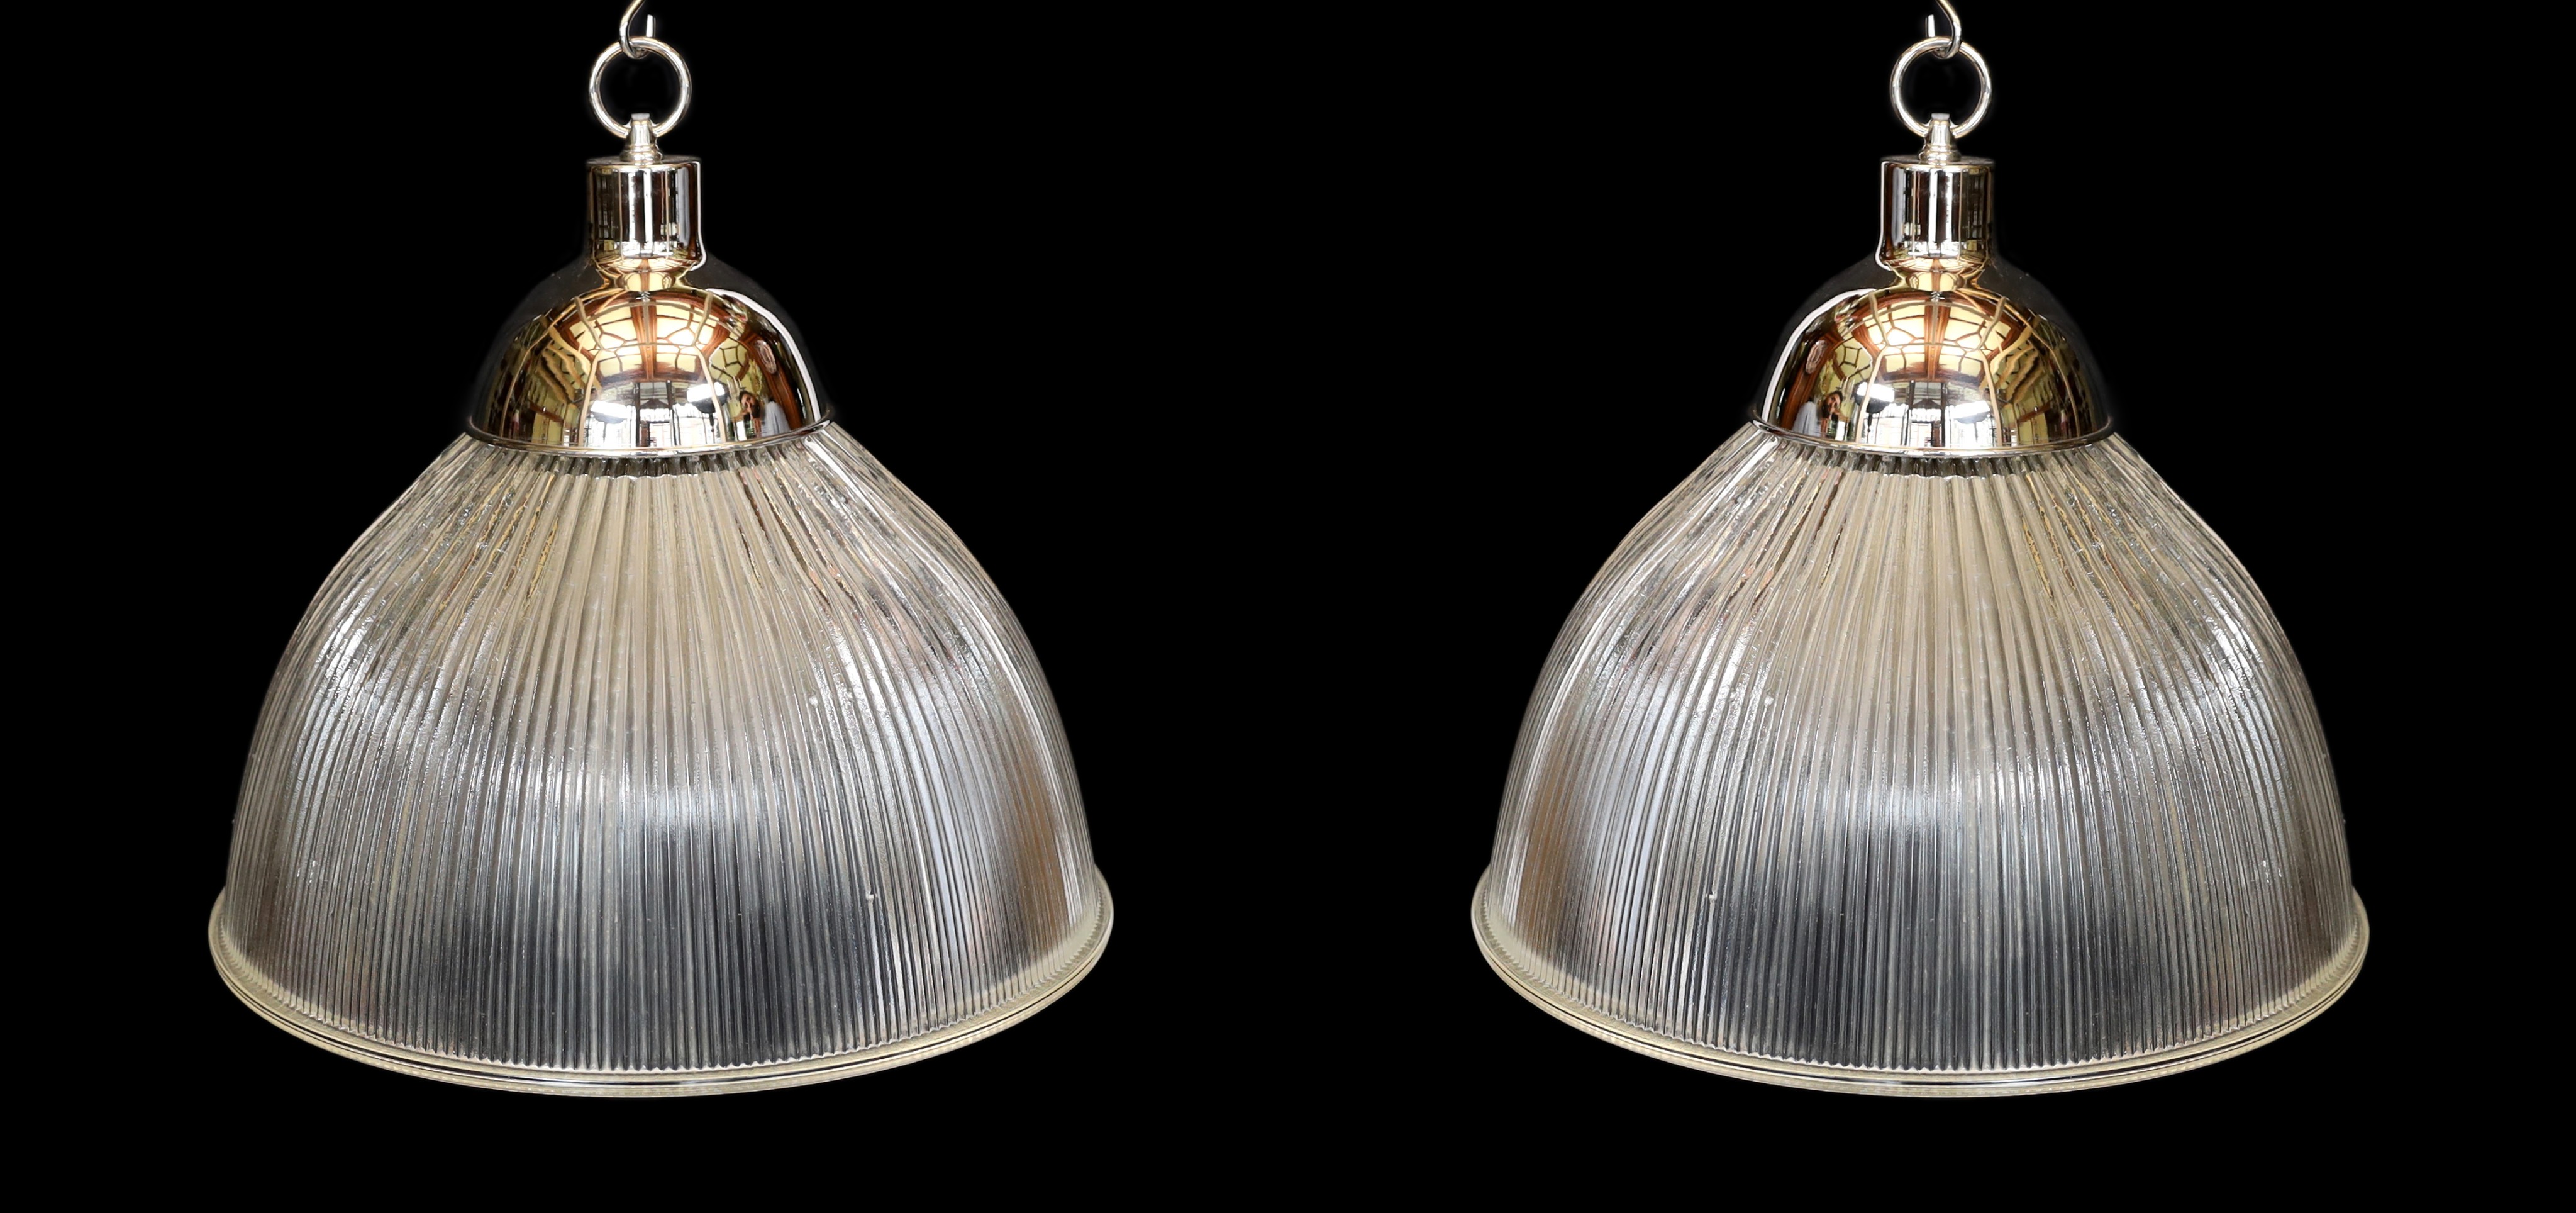 A pair of industrial style chrome plated ceiling lights with ribbed glass shades, signed Endural, diameter 46.5cm. height 50cm